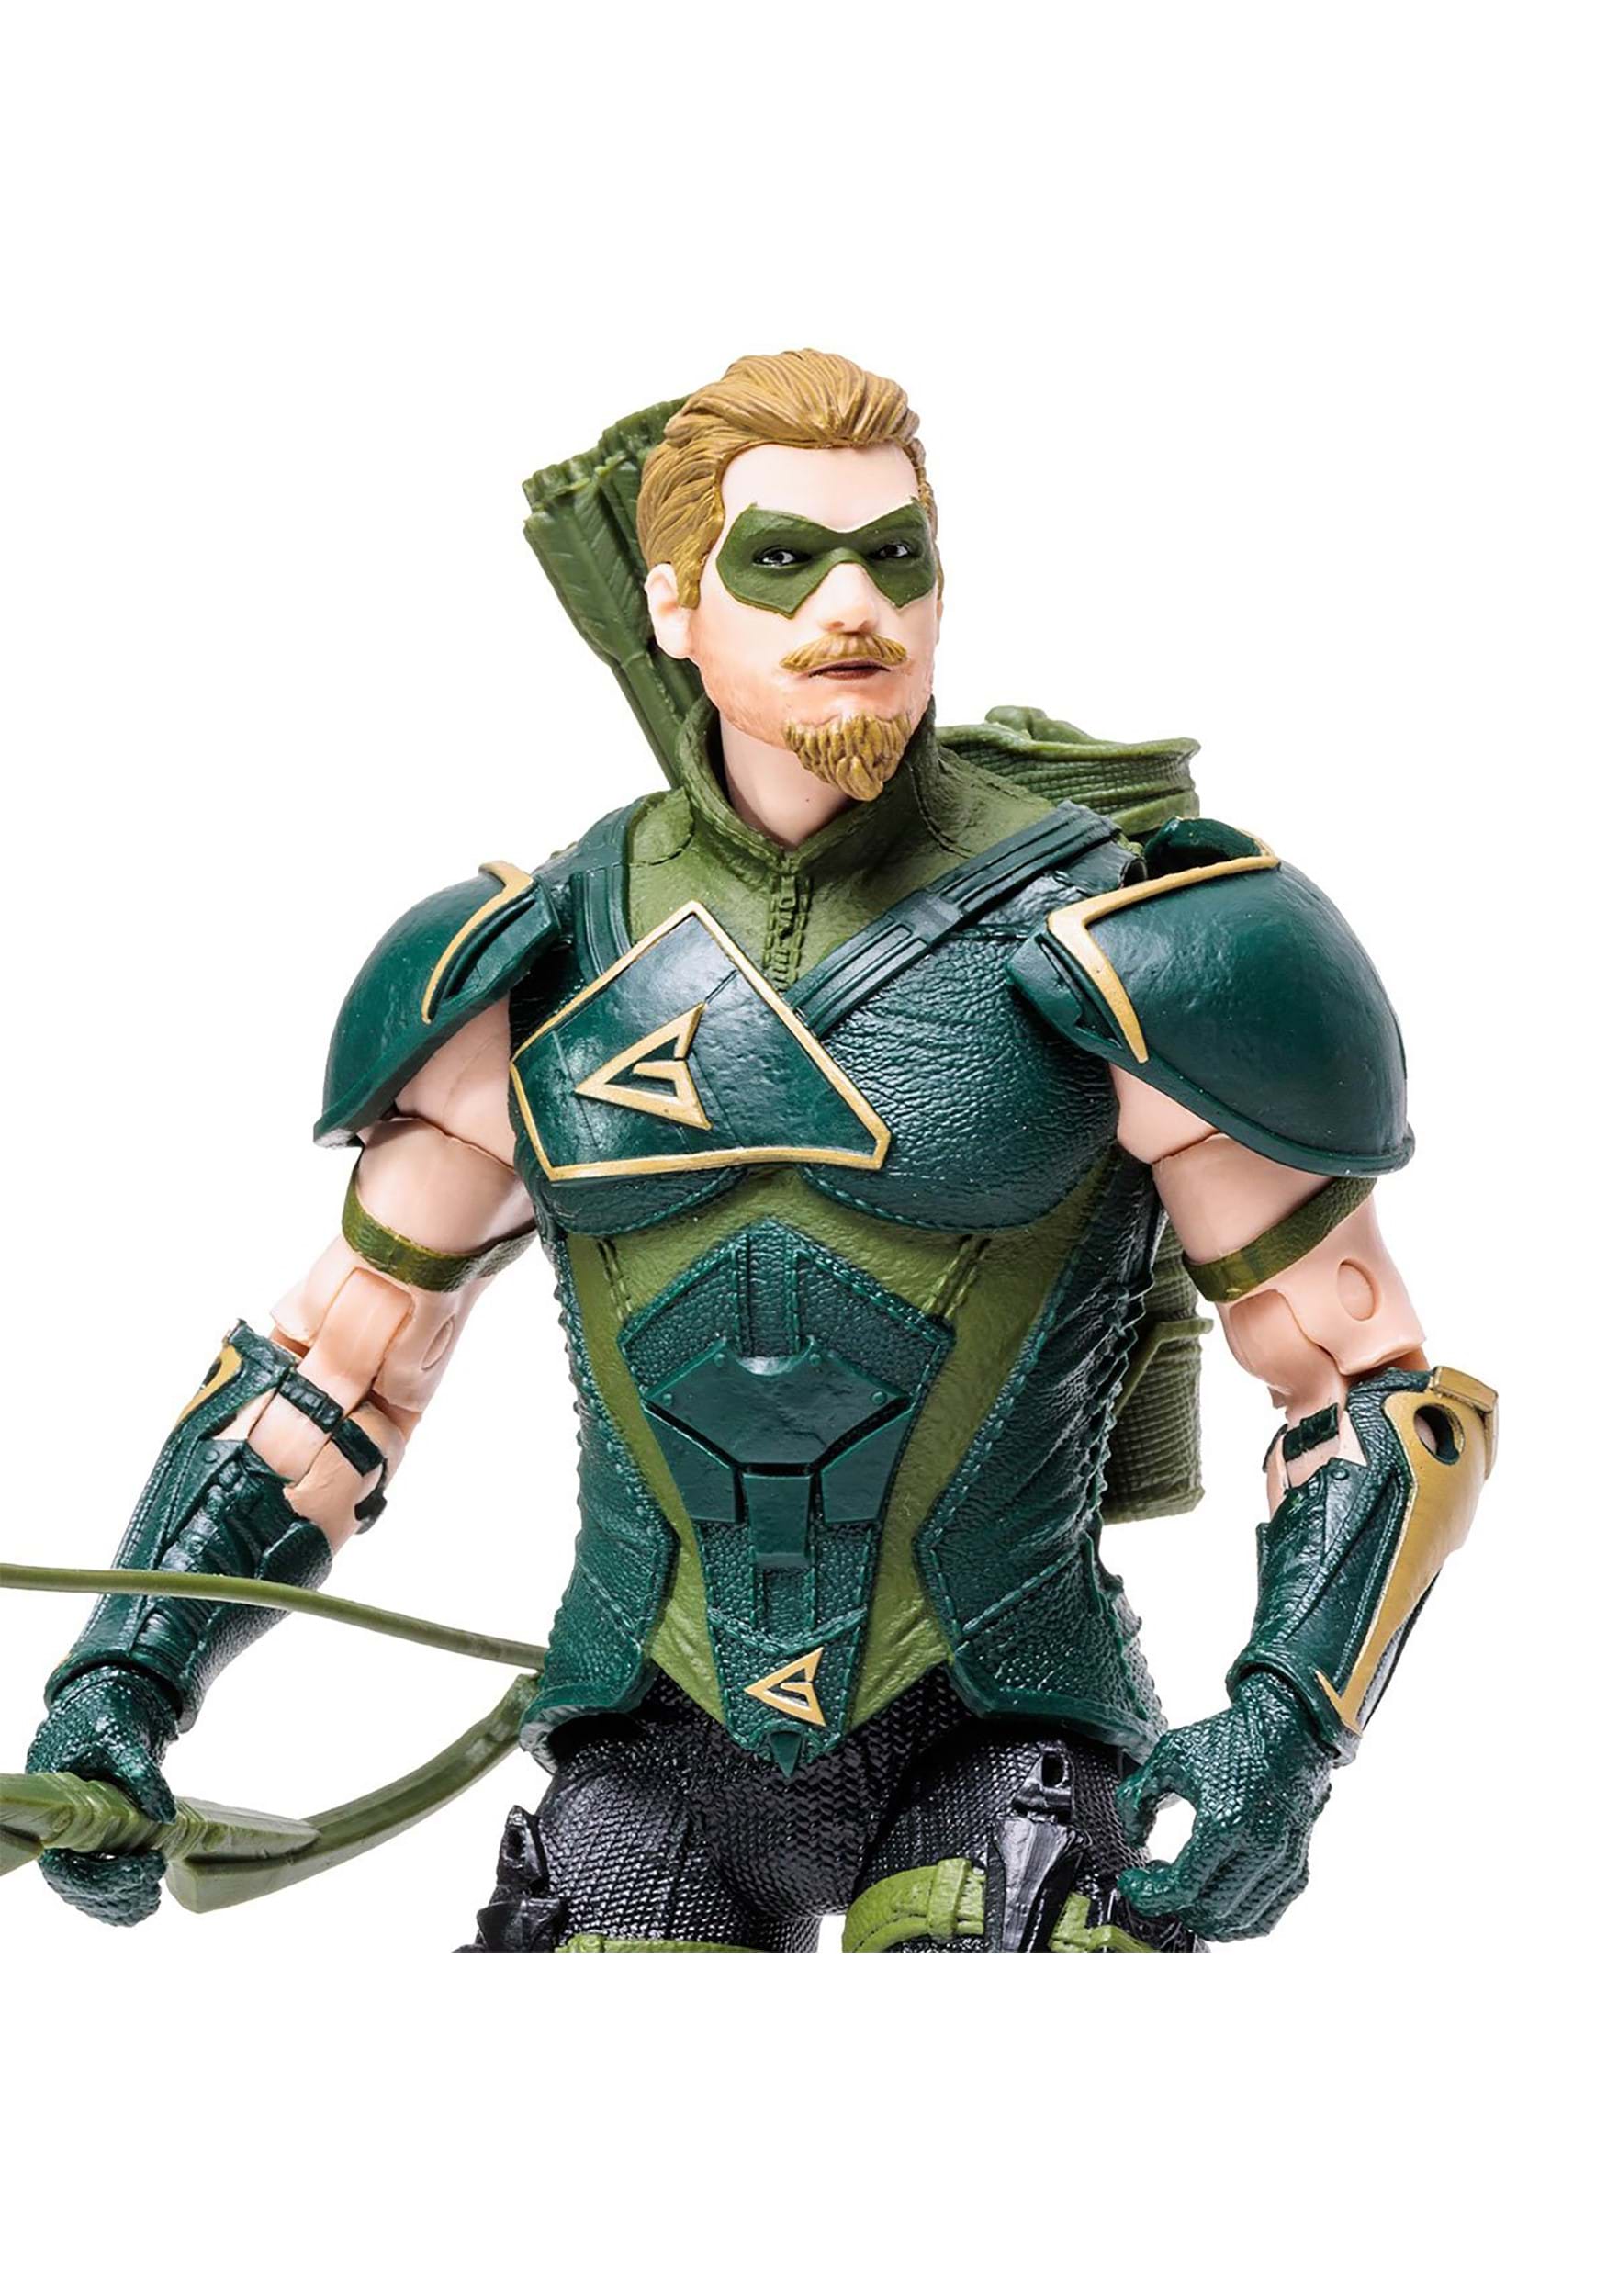 DC Gaming Wave 7 Injustice 2 Green Arrow 7 Scale Action Figure